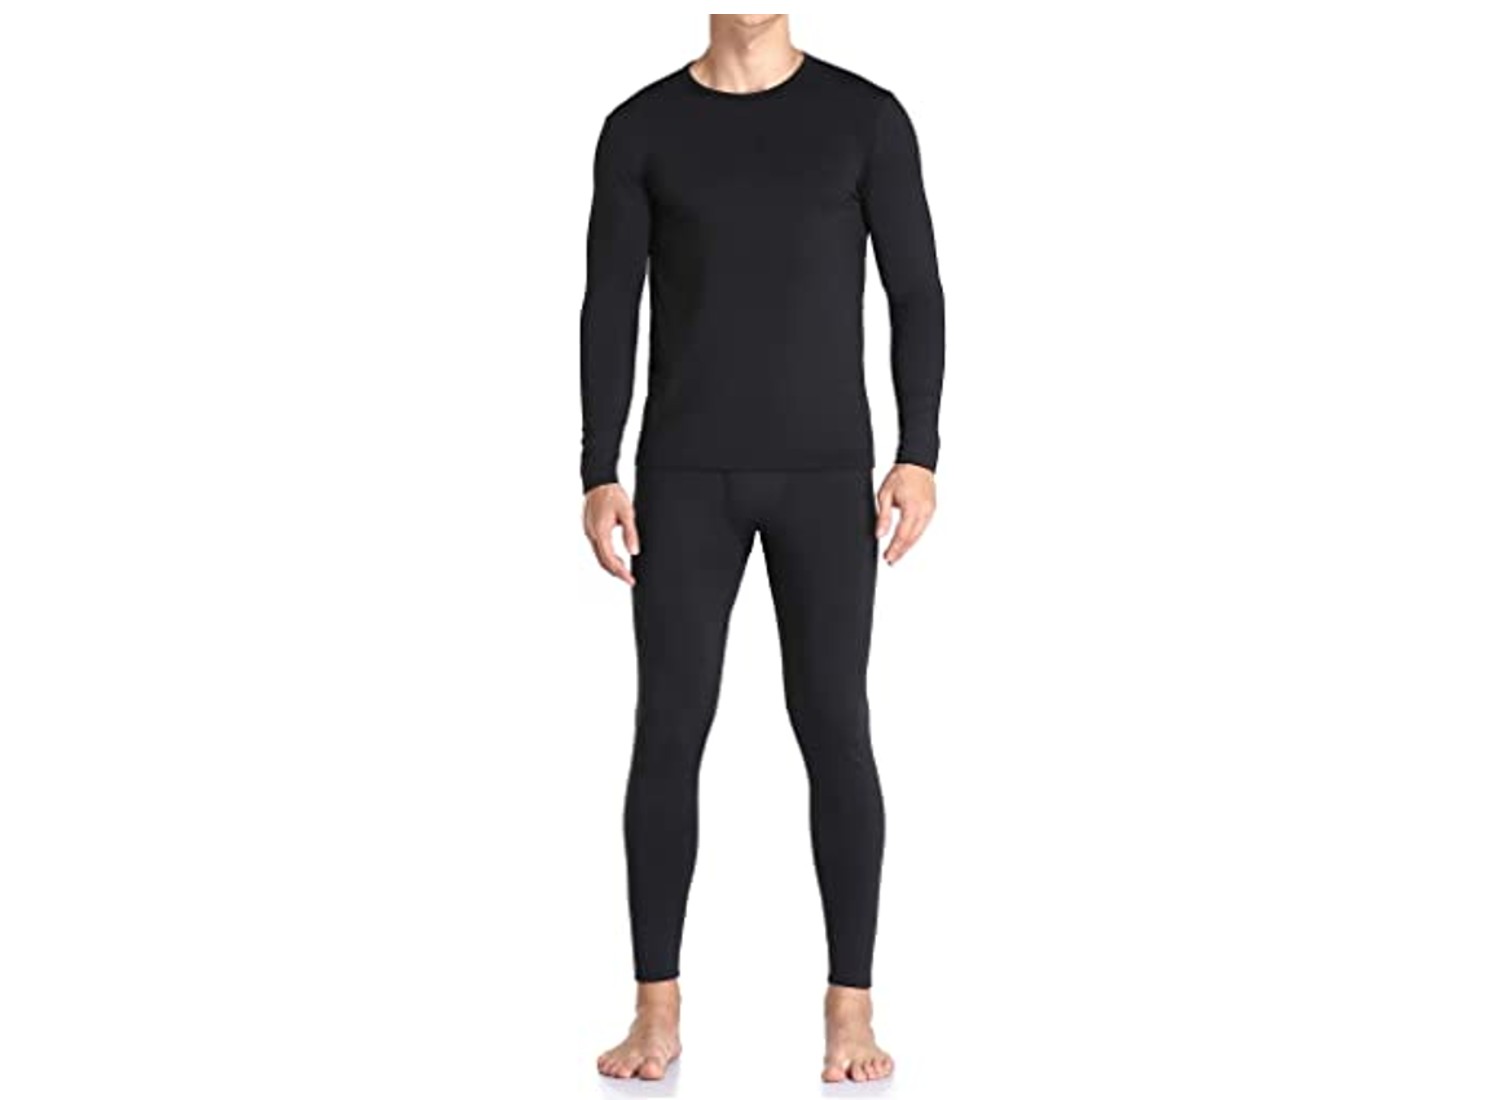 What is the Best Material for Long Johns?– Thermajane